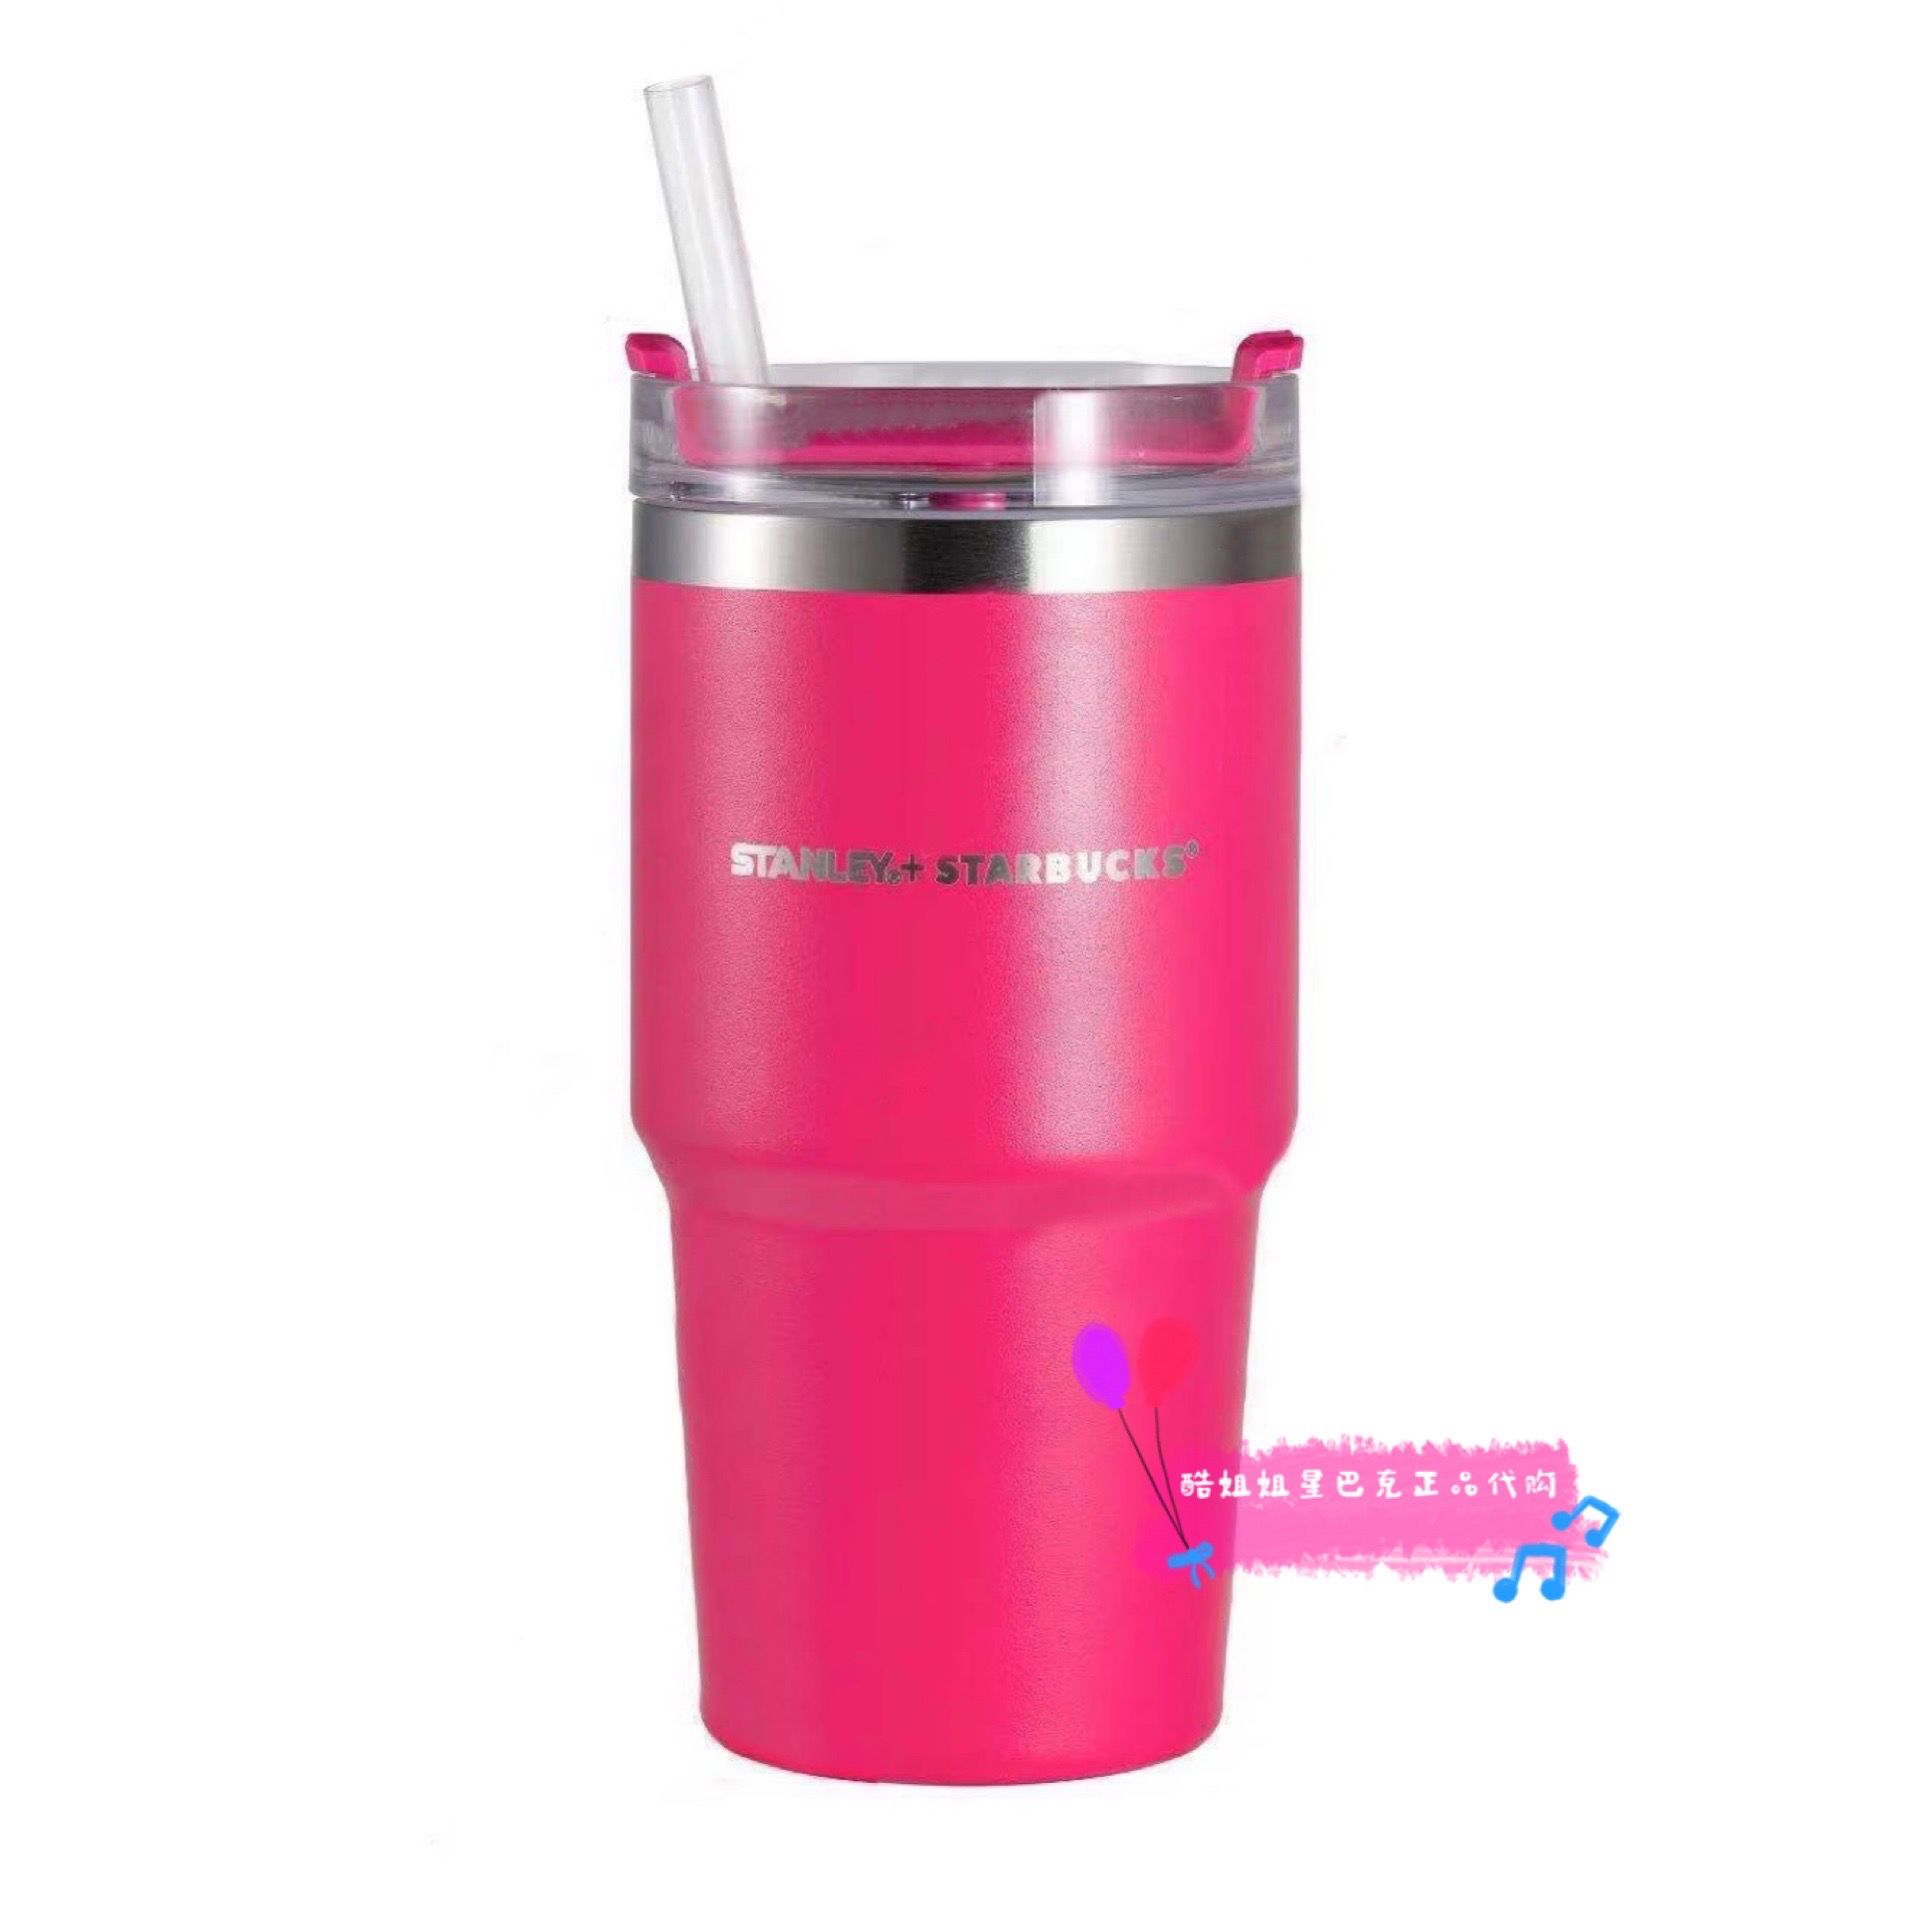 💓 Y'all the new “Ravishing Pink” Stanley 30 oz is just that